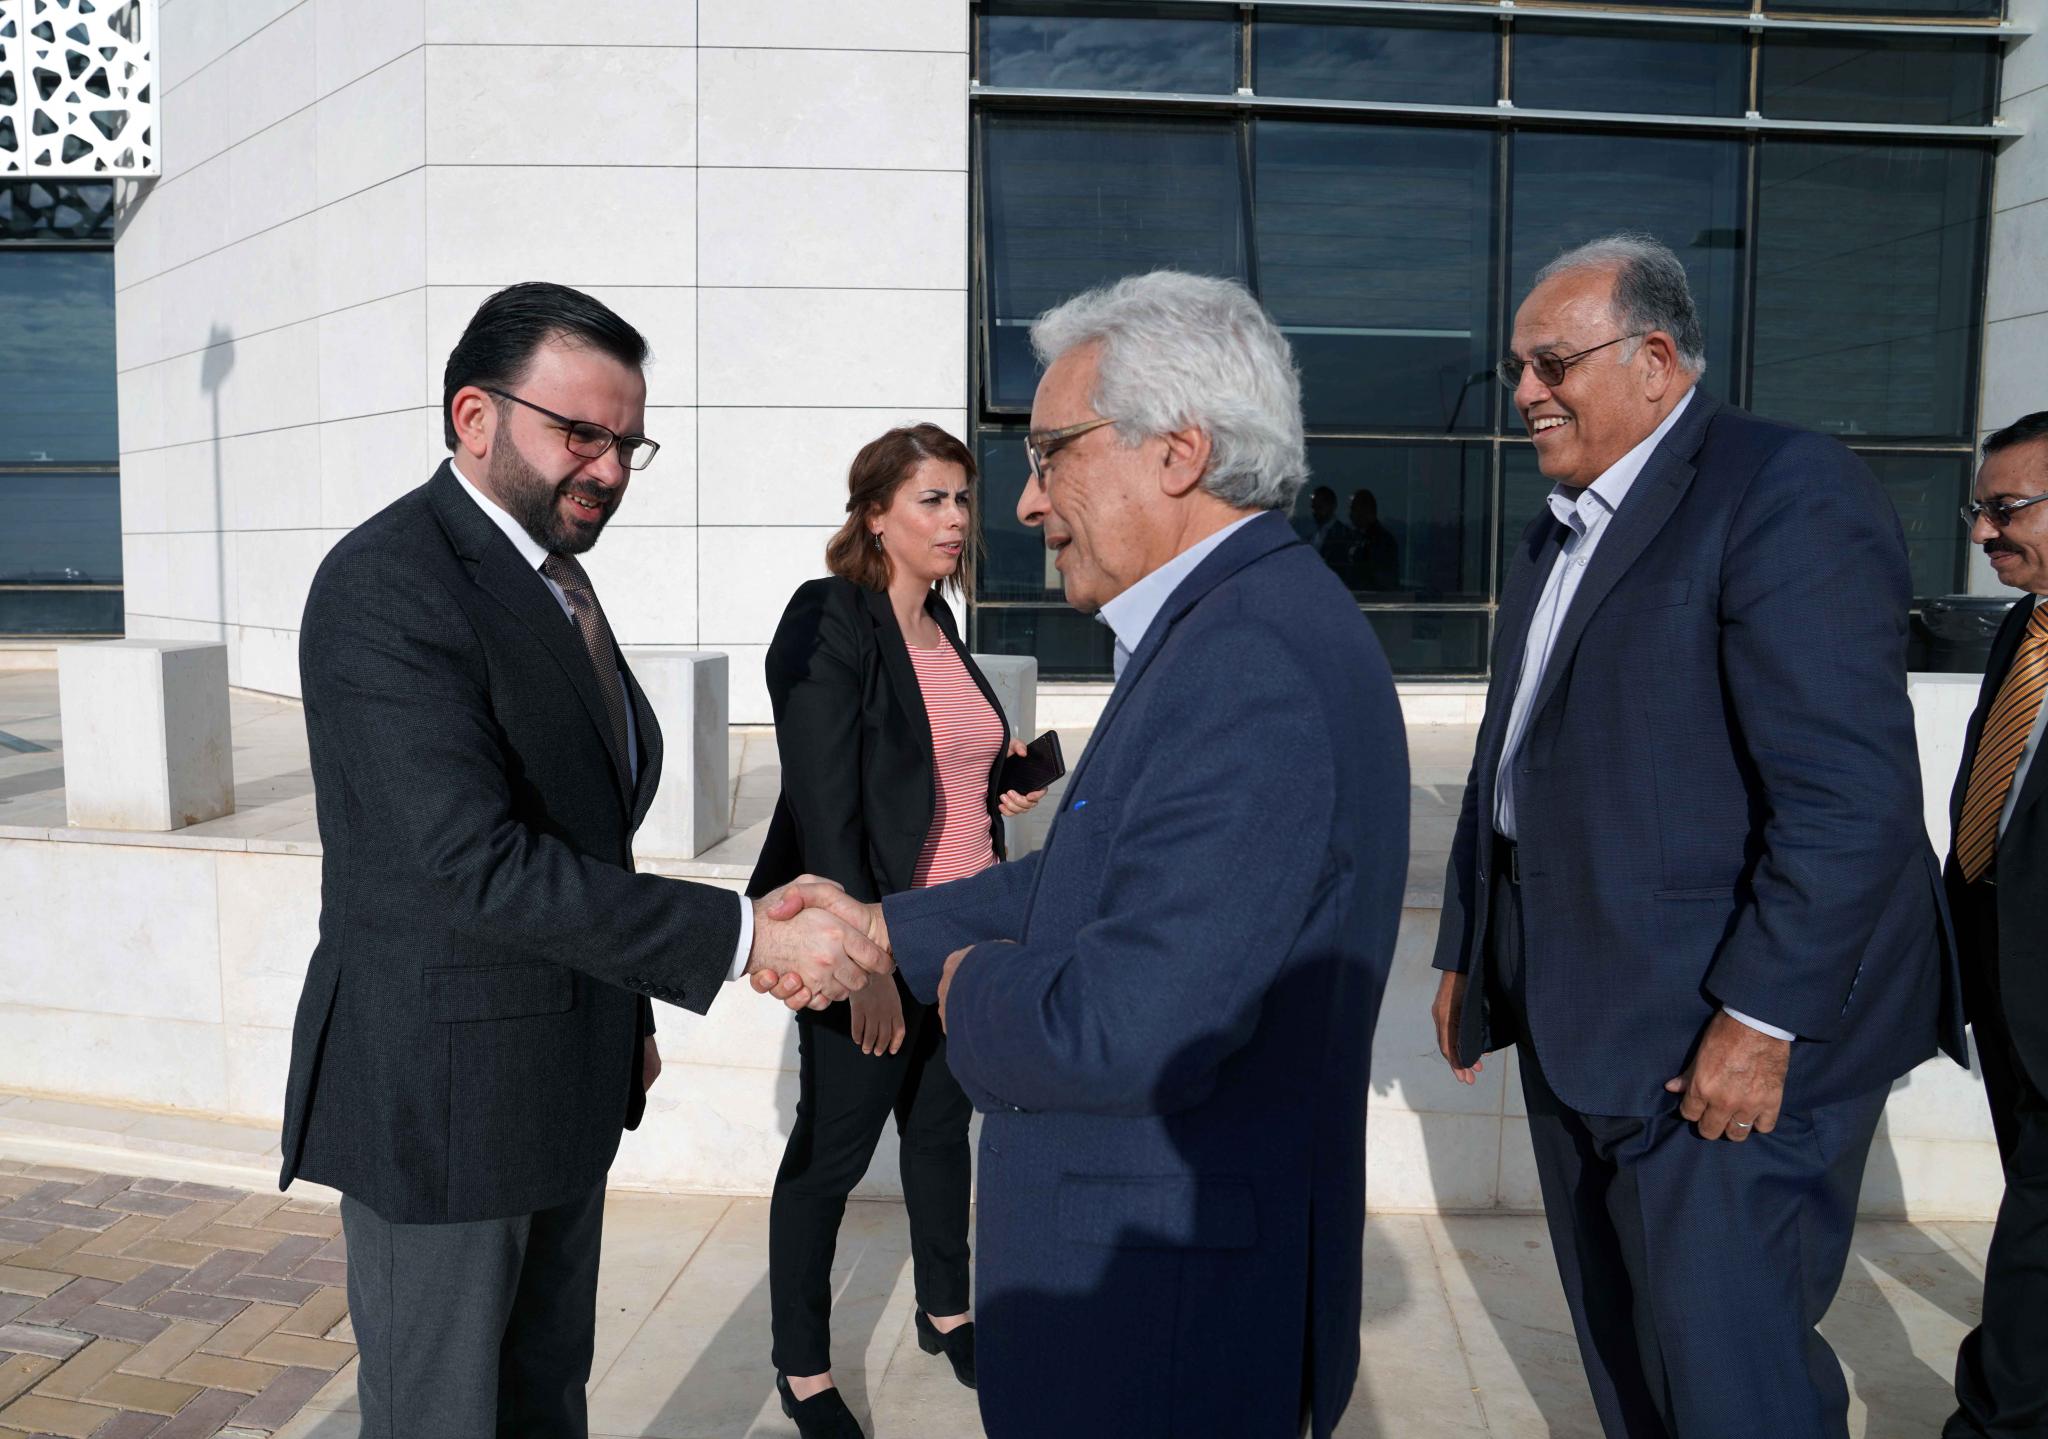 the visit of Minister of Culture Dr. Ihab Bseiso to the university